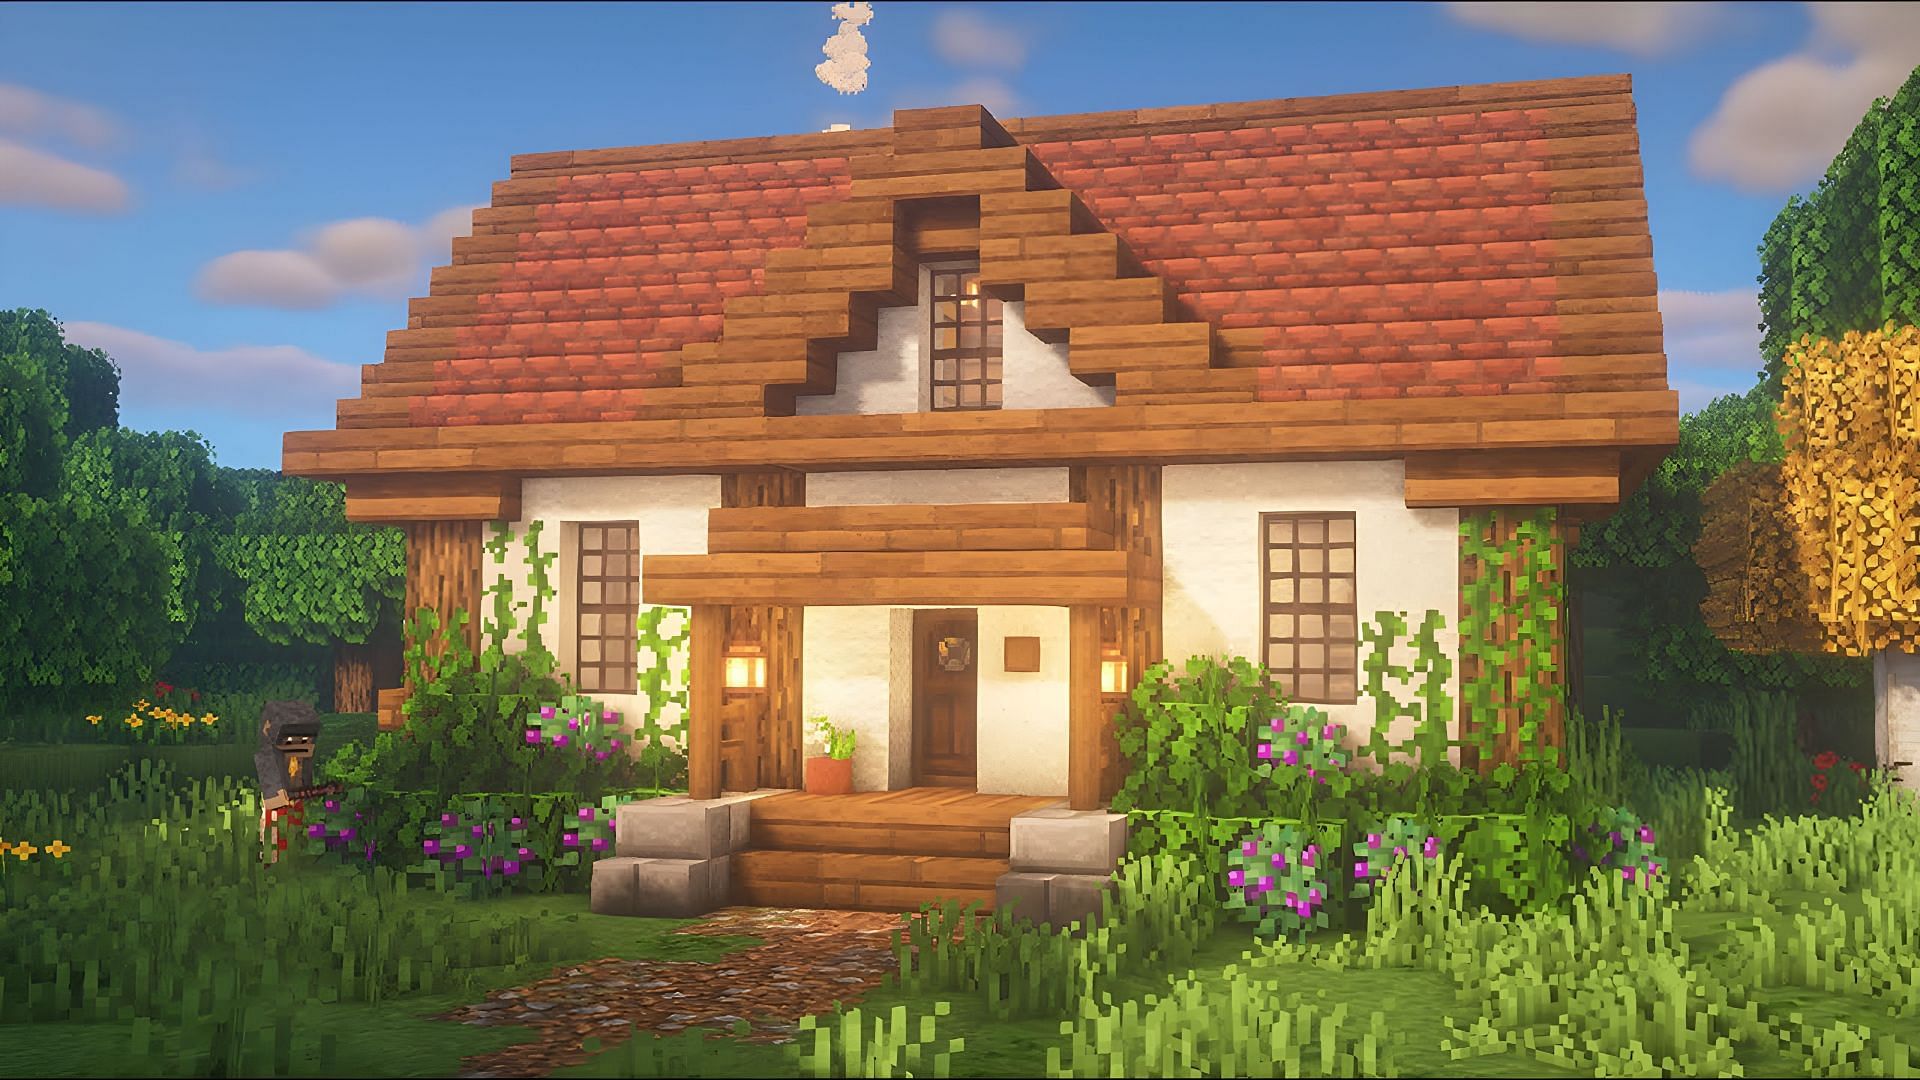 Cozy cottages are so cute in Minecraft (Image via Youtube/BigTonyMC)